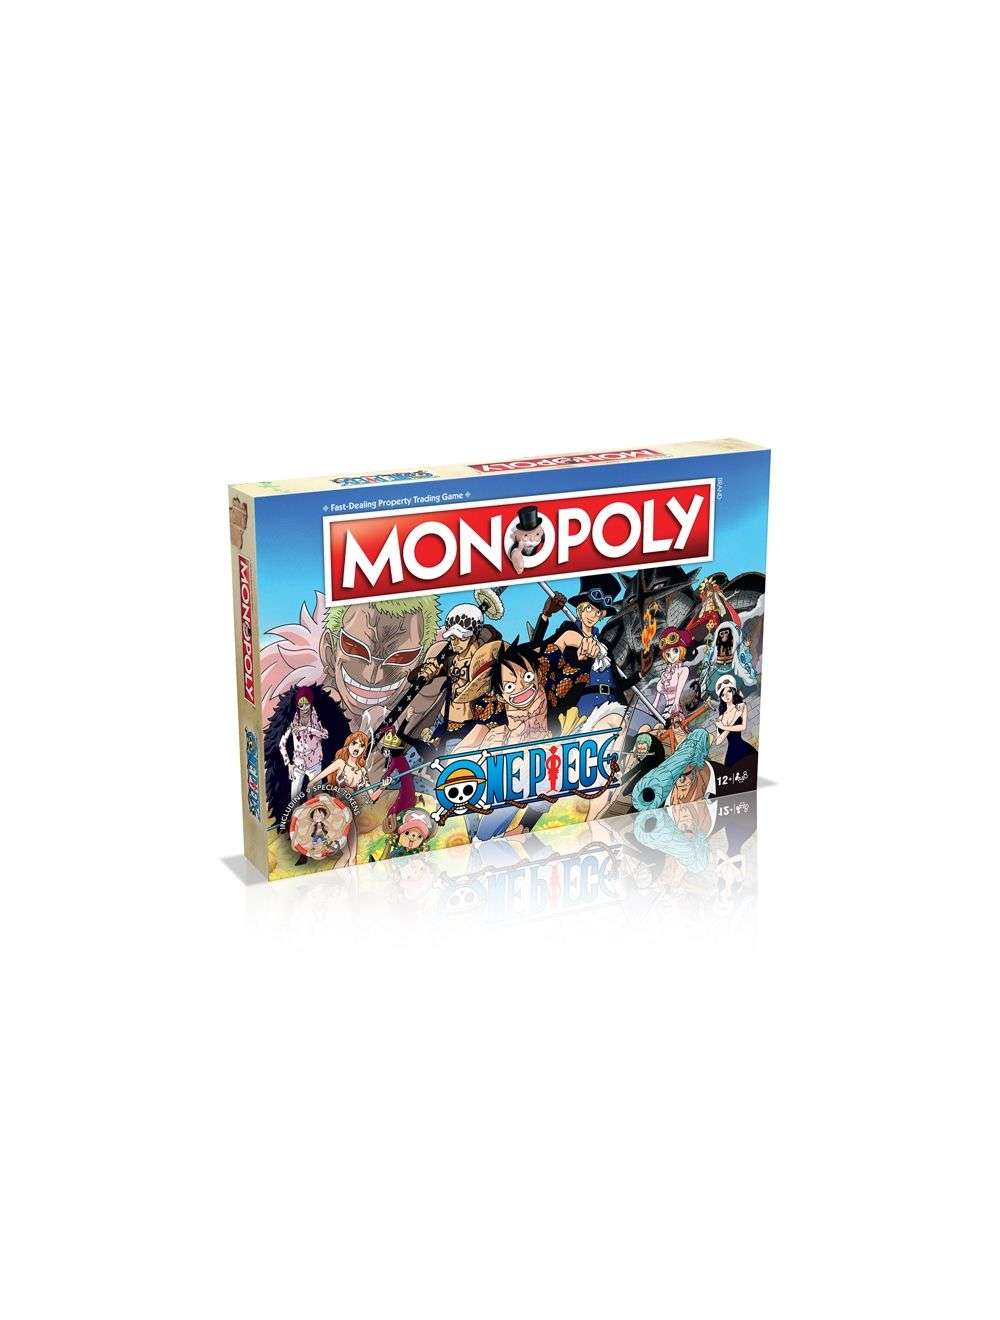 One Piece, Monopoly